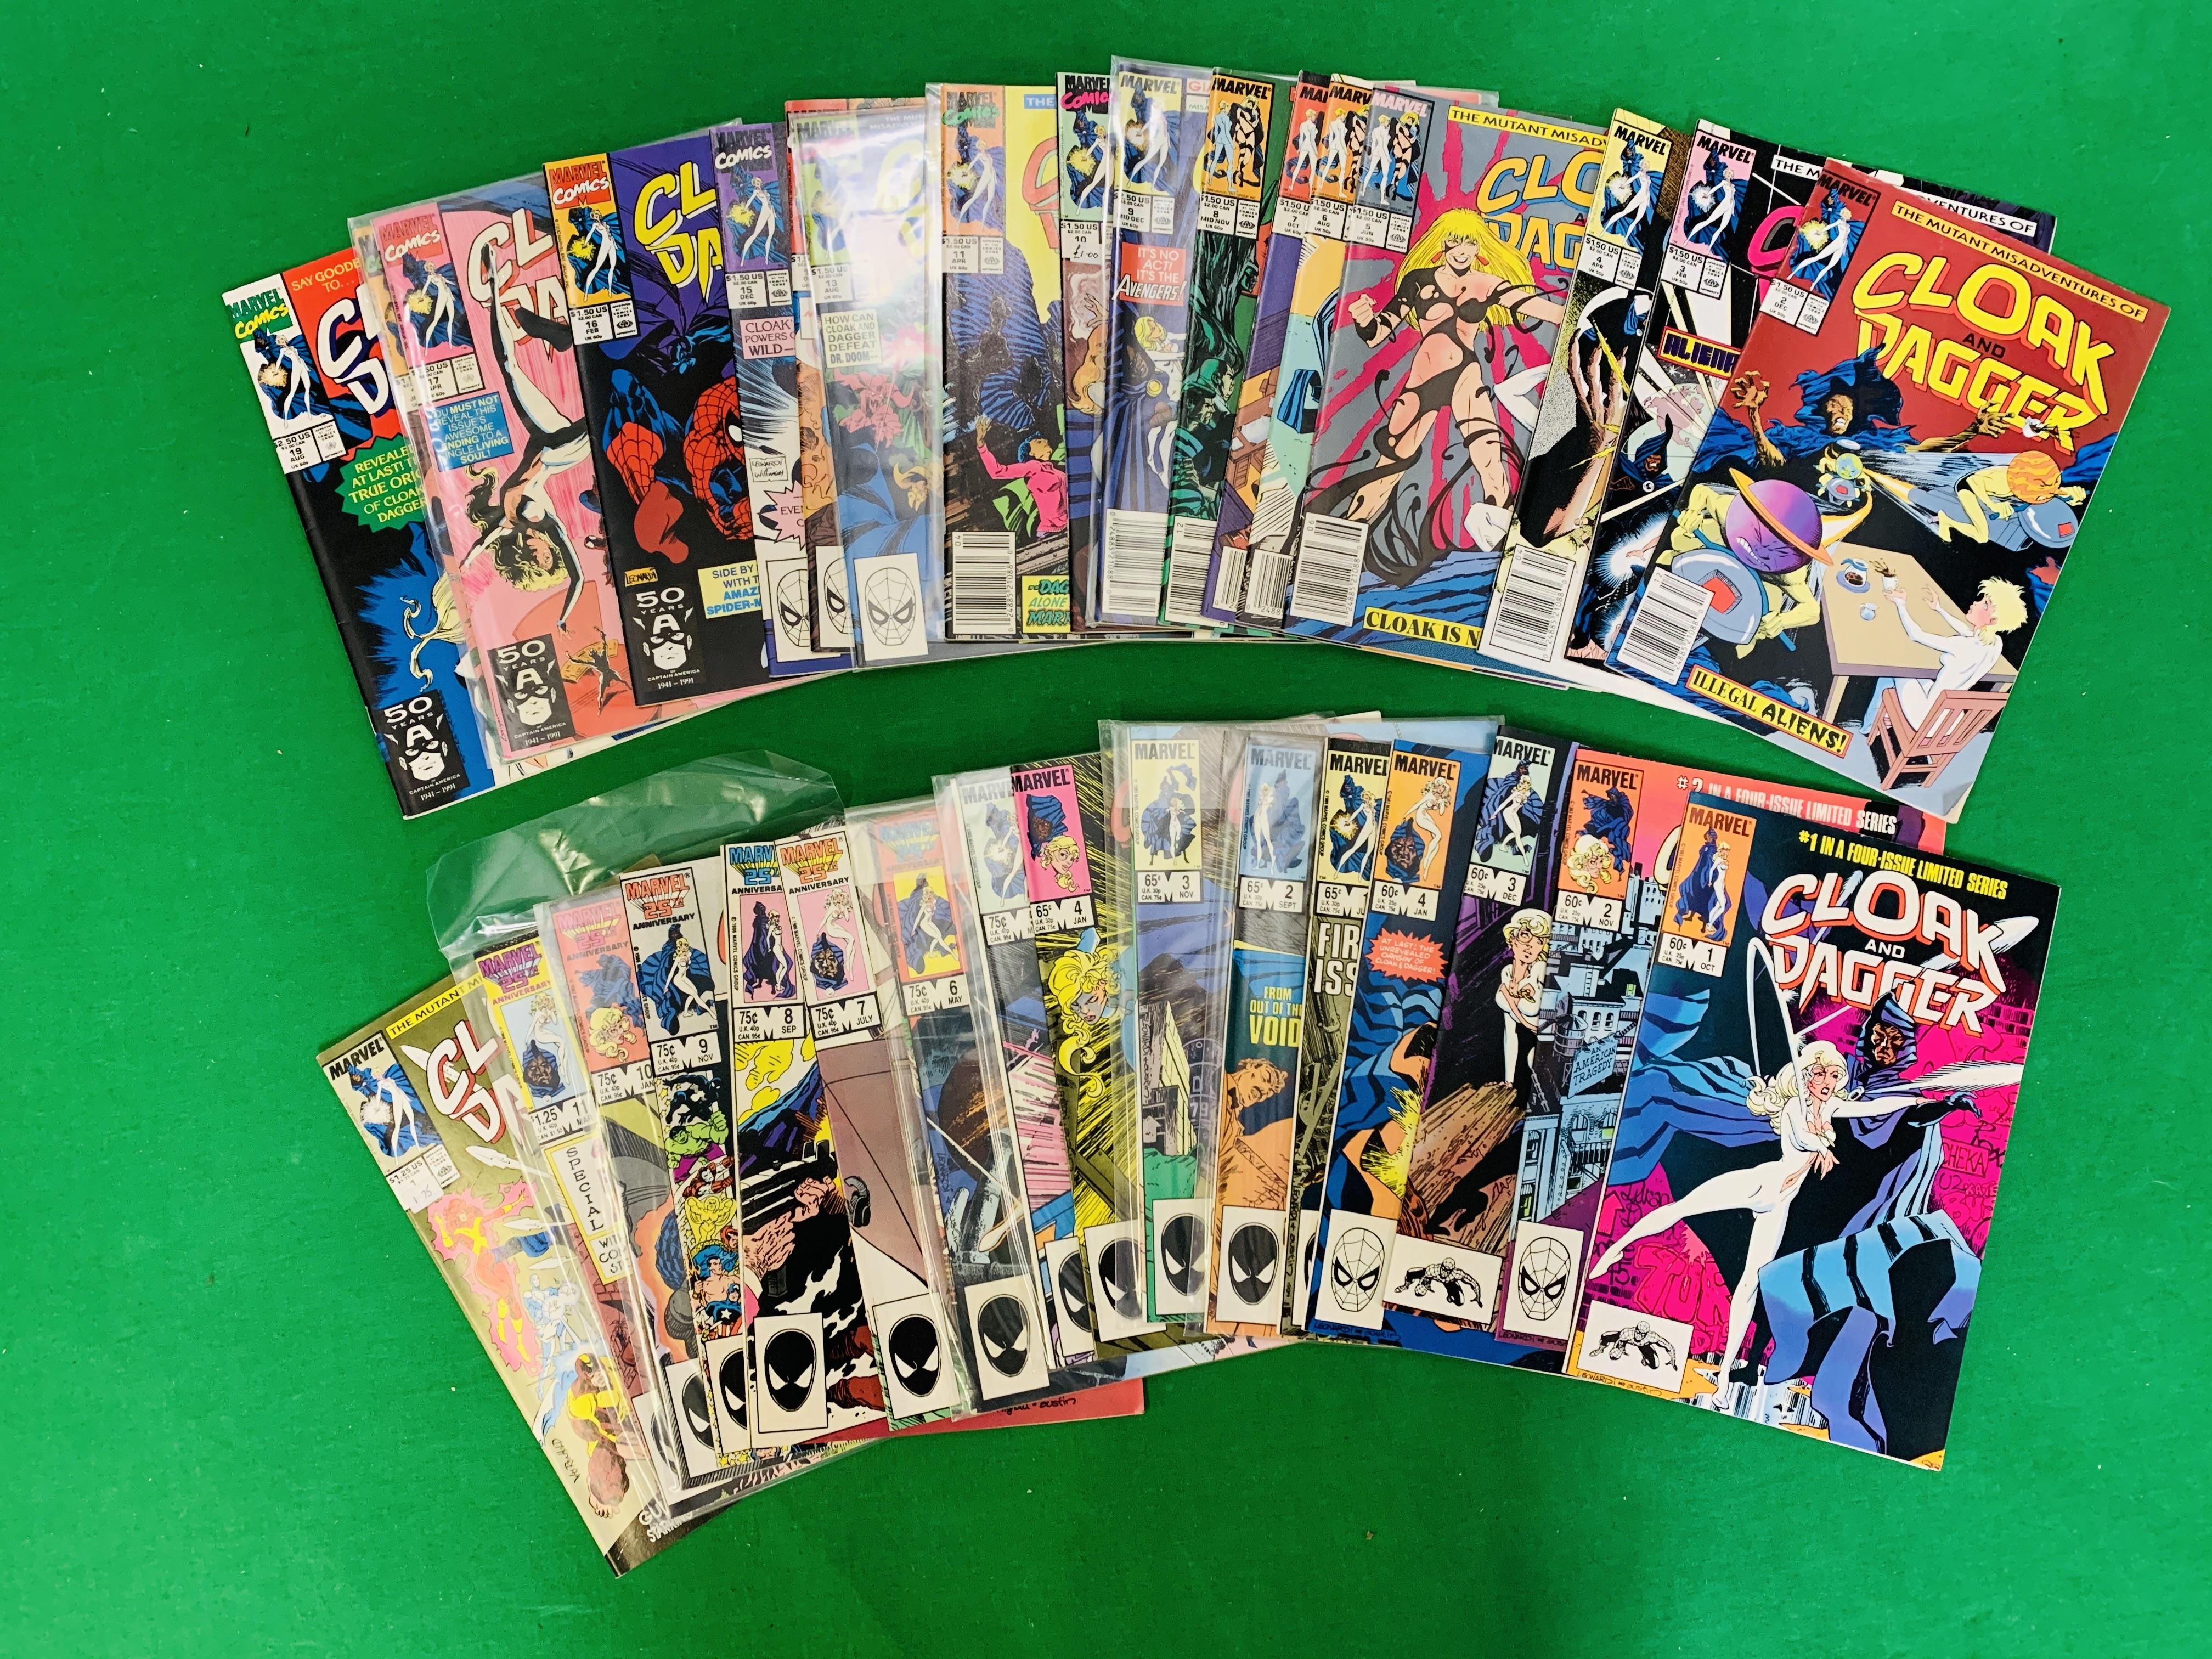 MARVEL COMICS CLOAK AND DAGGER NO. 1 - 4 FROM 1983, NO. 1 - 11 FROM 1985, NO. 1 - 19 FROM 1988.